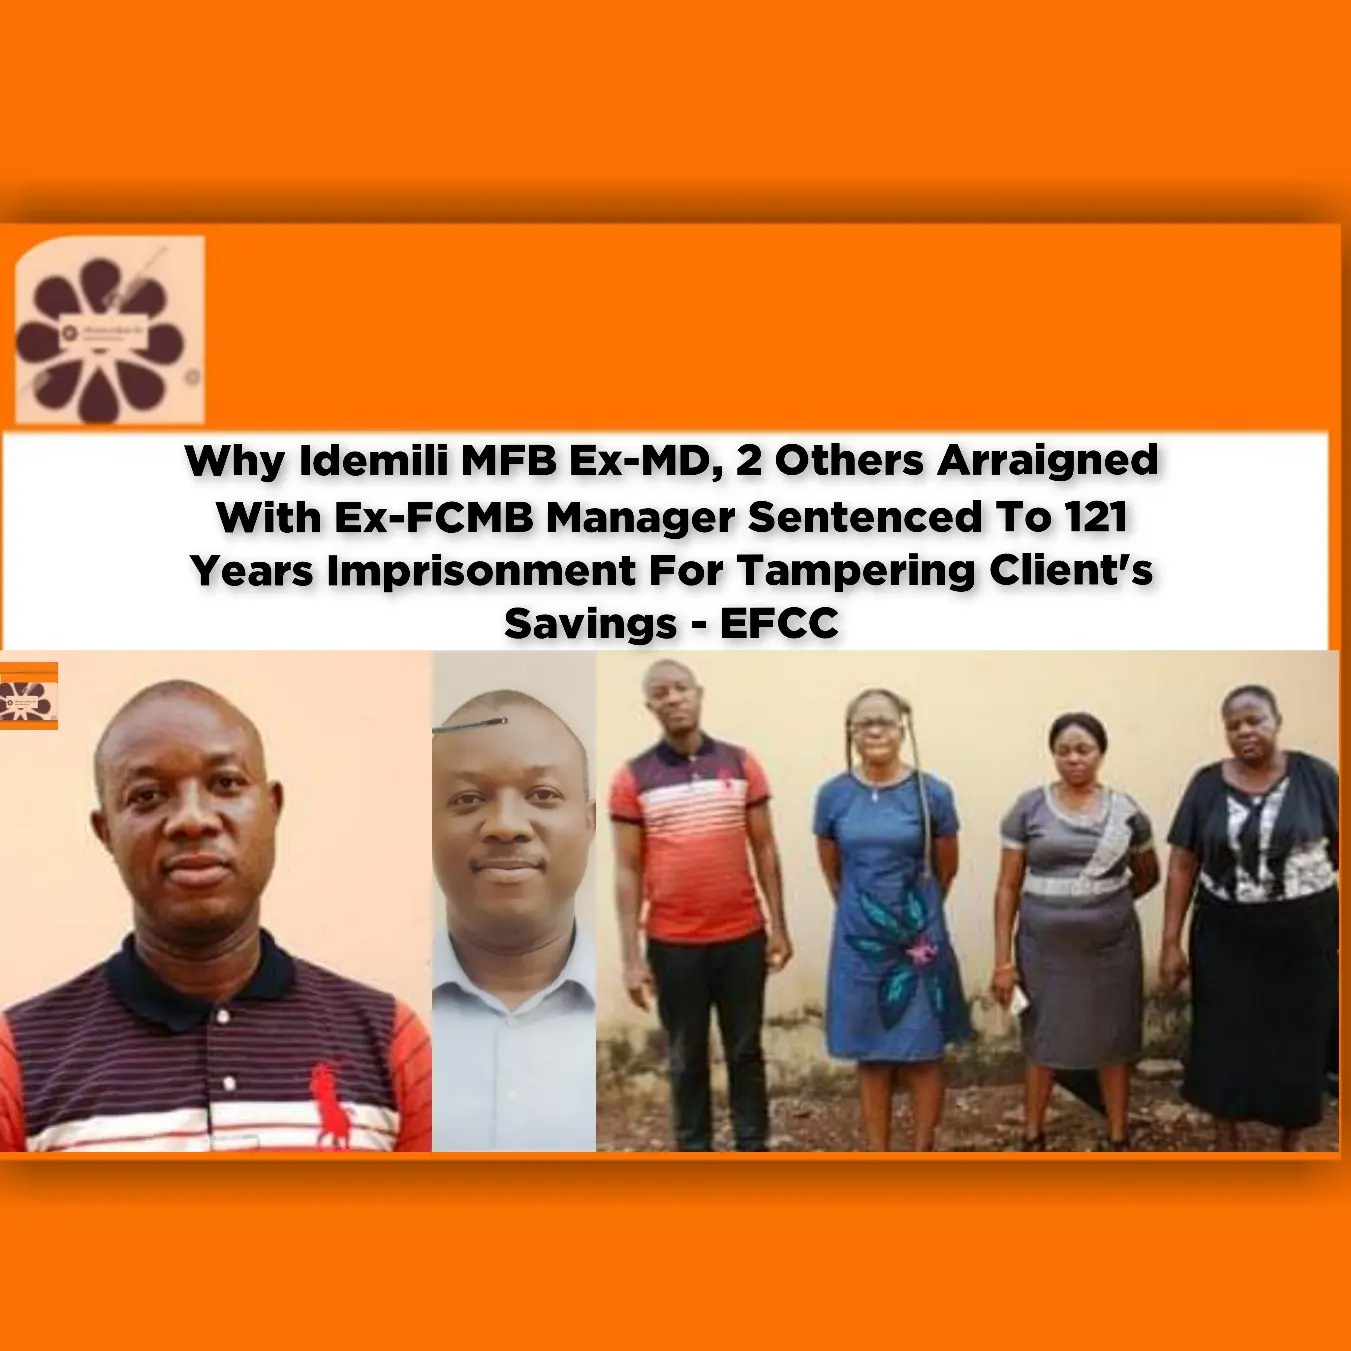 Why Idemili MFB Ex-MD, 2 Others Arraigned With Ex-FCMB Manager Sentenced To 121 Years Imprisonment For Tampering Client's Savings - EFCC ~ OsazuwaAkonedo #Abubakar